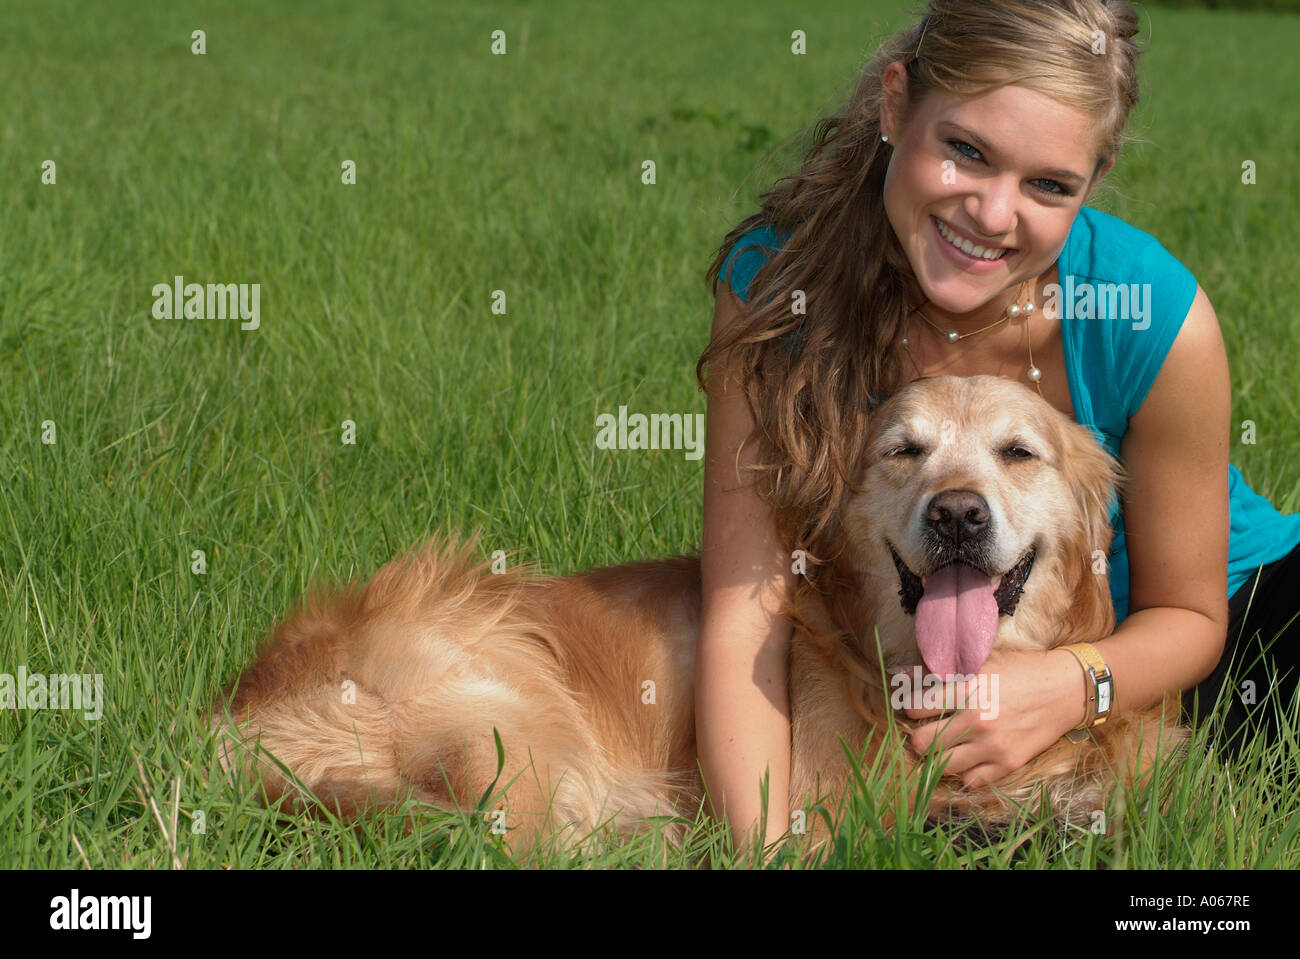 A blonde woman holding her pet dog smiles at the camera Stock Photo